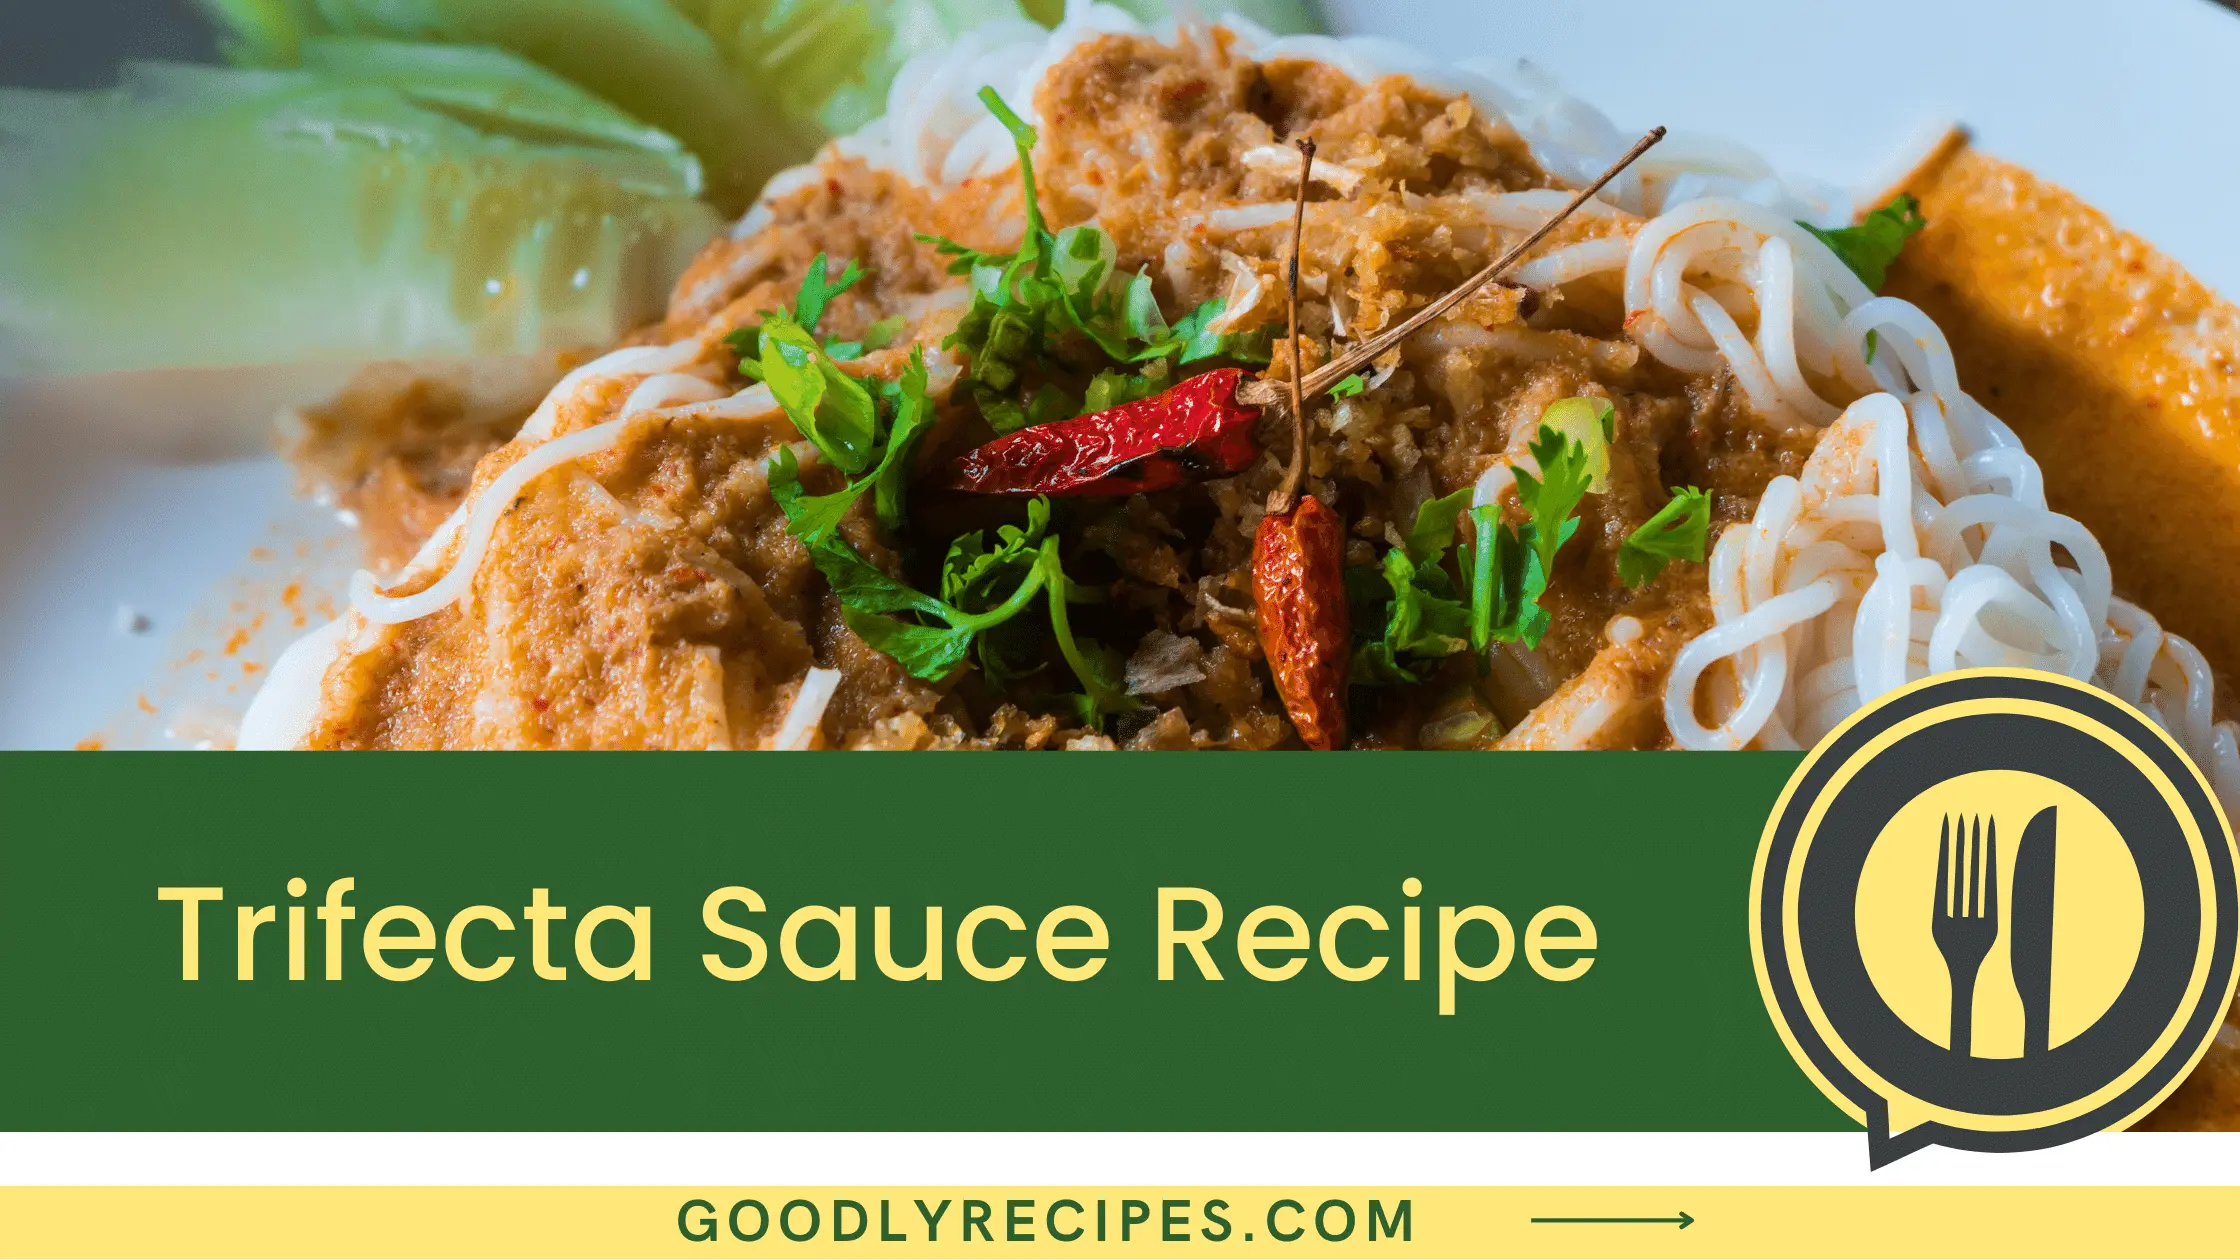 Trifecta Sauce Recipe - For Food Lovers